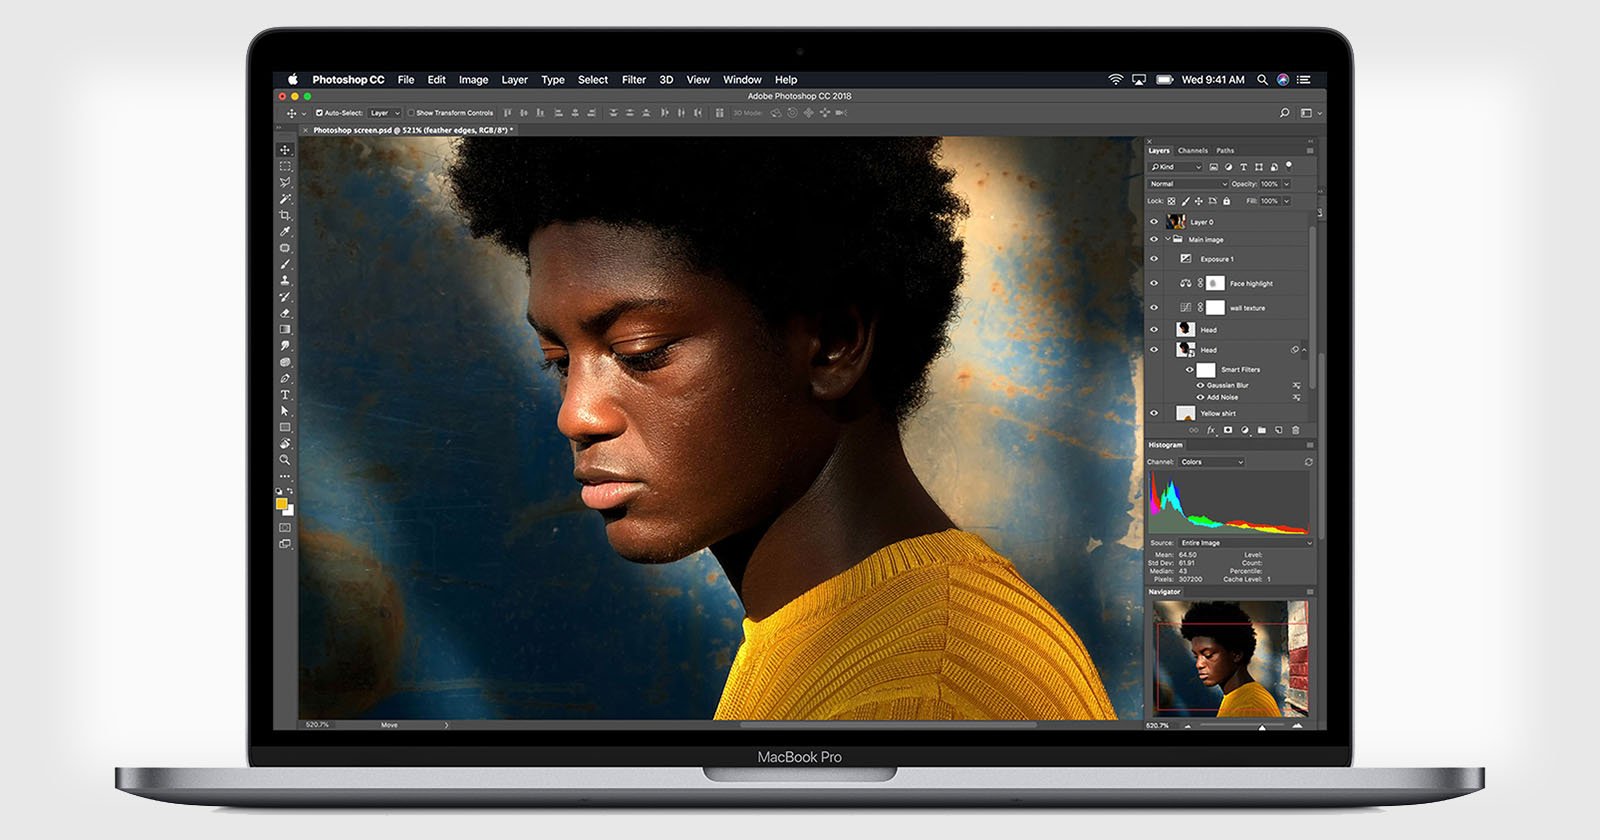 adobe photoshop cc for macbook pro free download